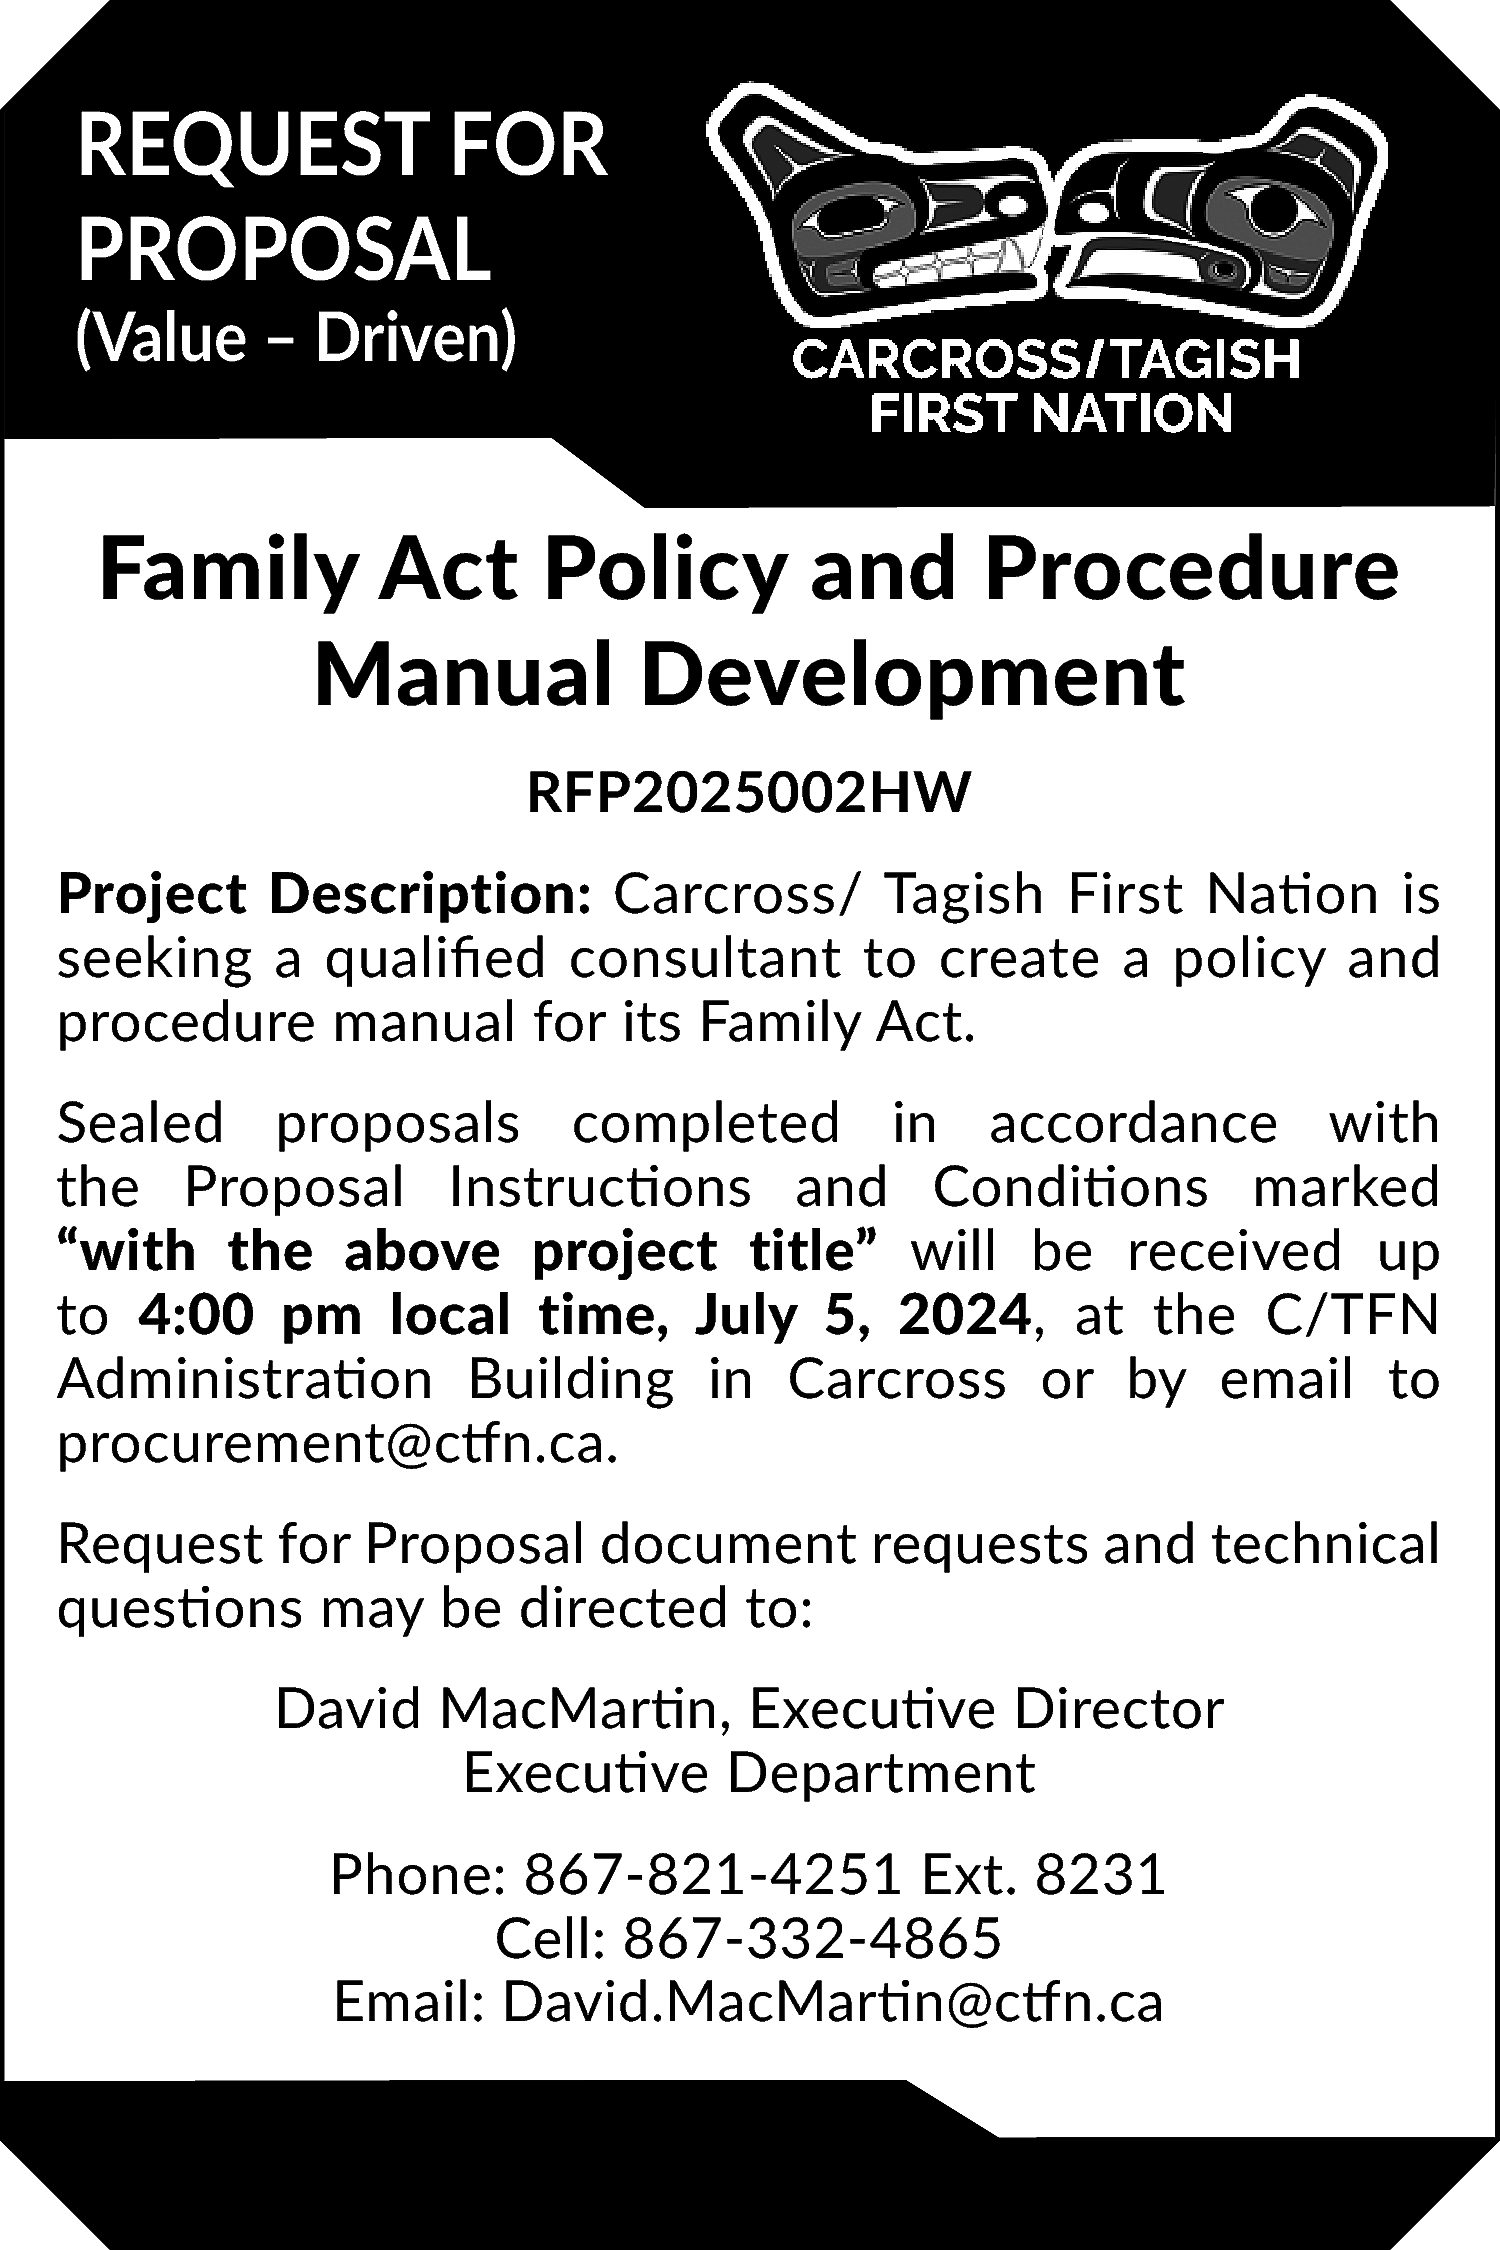 REQUEST FOR <br>PROPOSAL <br>(Value –  REQUEST FOR  PROPOSAL  (Value – Driven)    Family Act Policy and Procedure  Manual Development  RFP2025002HW  Project Description: Carcross/ Tagish First Nation is  seeking a qualified consultant to create a policy and  procedure manual for its Family Act.  Sealed proposals completed in accordance with  the Proposal Instructions and Conditions marked  “with the above project title” will be received up  to 4:00 pm local time, July 5, 2024, at the C/TFN  Administration Building in Carcross or by email to  procurement@ctfn.ca.  Request for Proposal document requests and technical  questions may be directed to:  David MacMartin, Executive Director  Executive Department  Phone: 867-821-4251 Ext. 8231  Cell: 867-332-4865  Email: David.MacMartin@ctfn.ca    